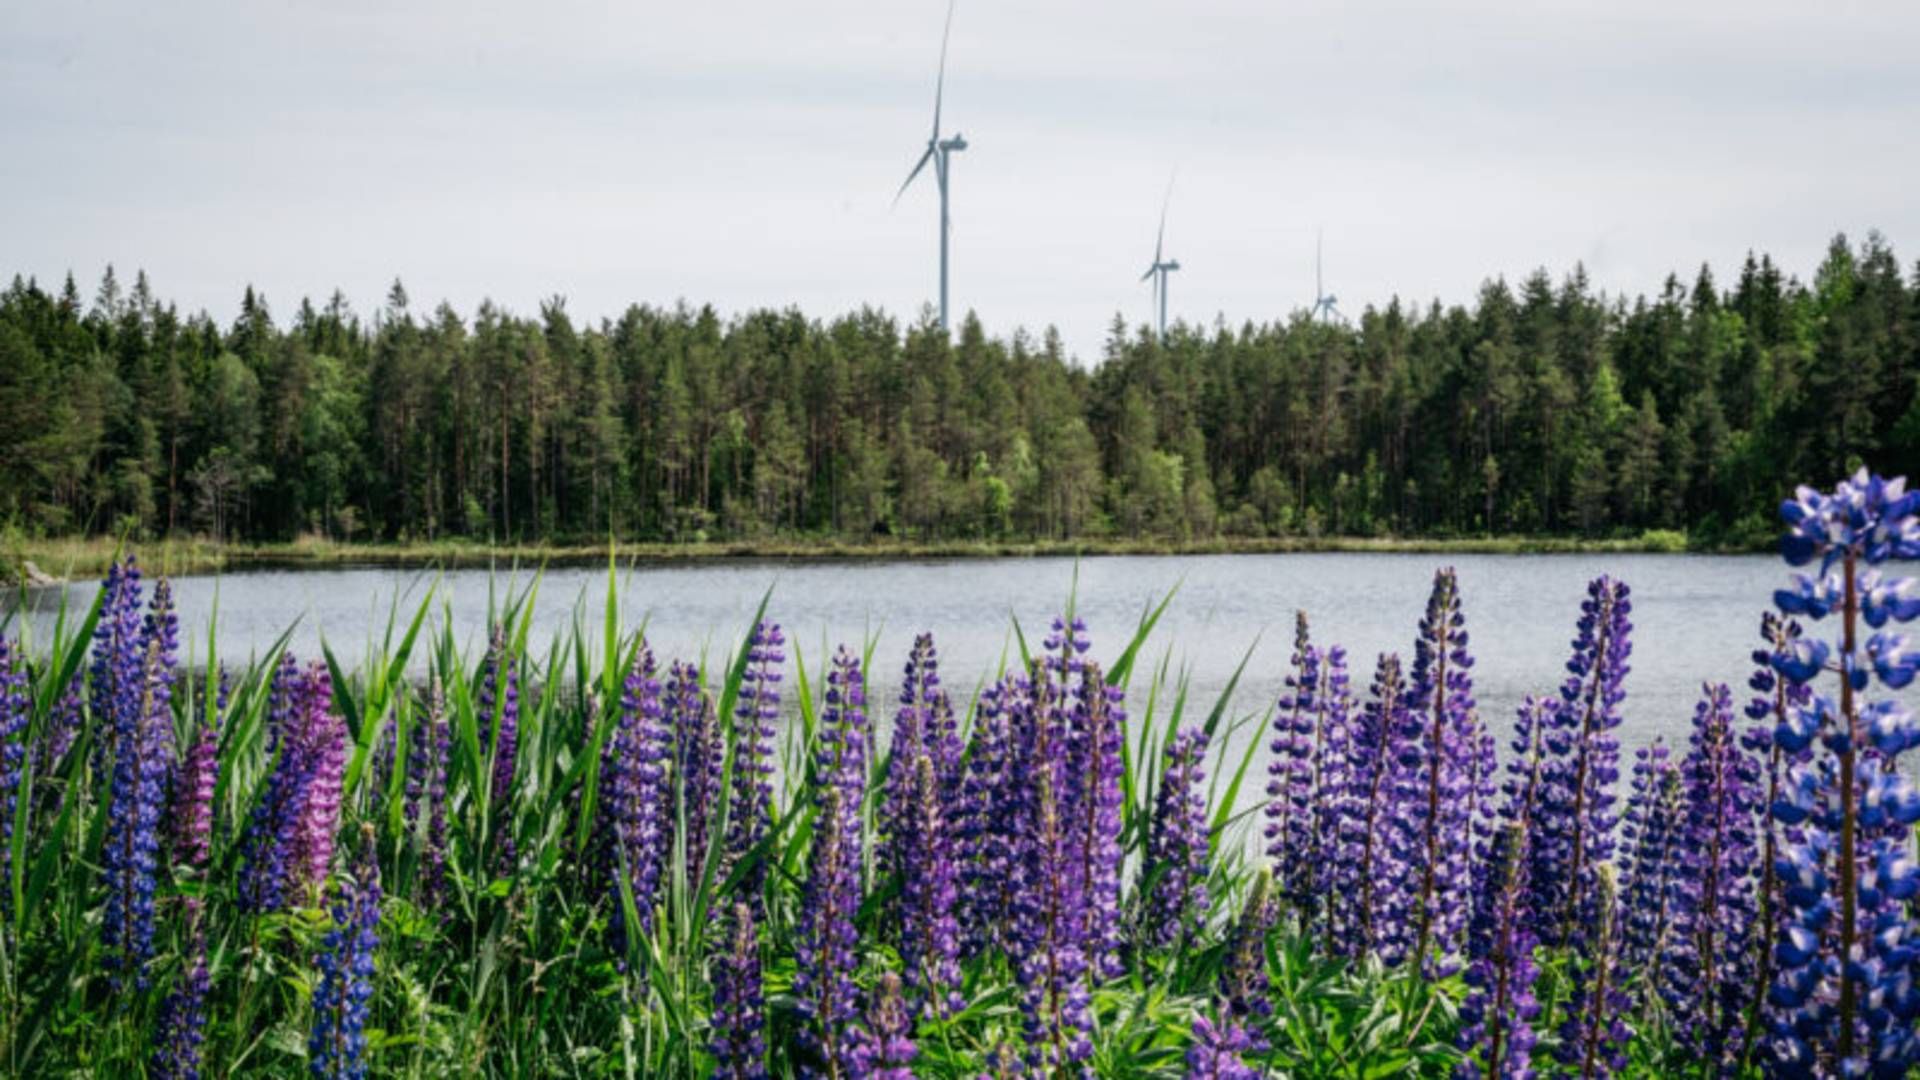 Last year, Cloudberry commissioned its largest wind farm to date, Marker of 56 MW. | Photo: Cloudberry Clean Energy